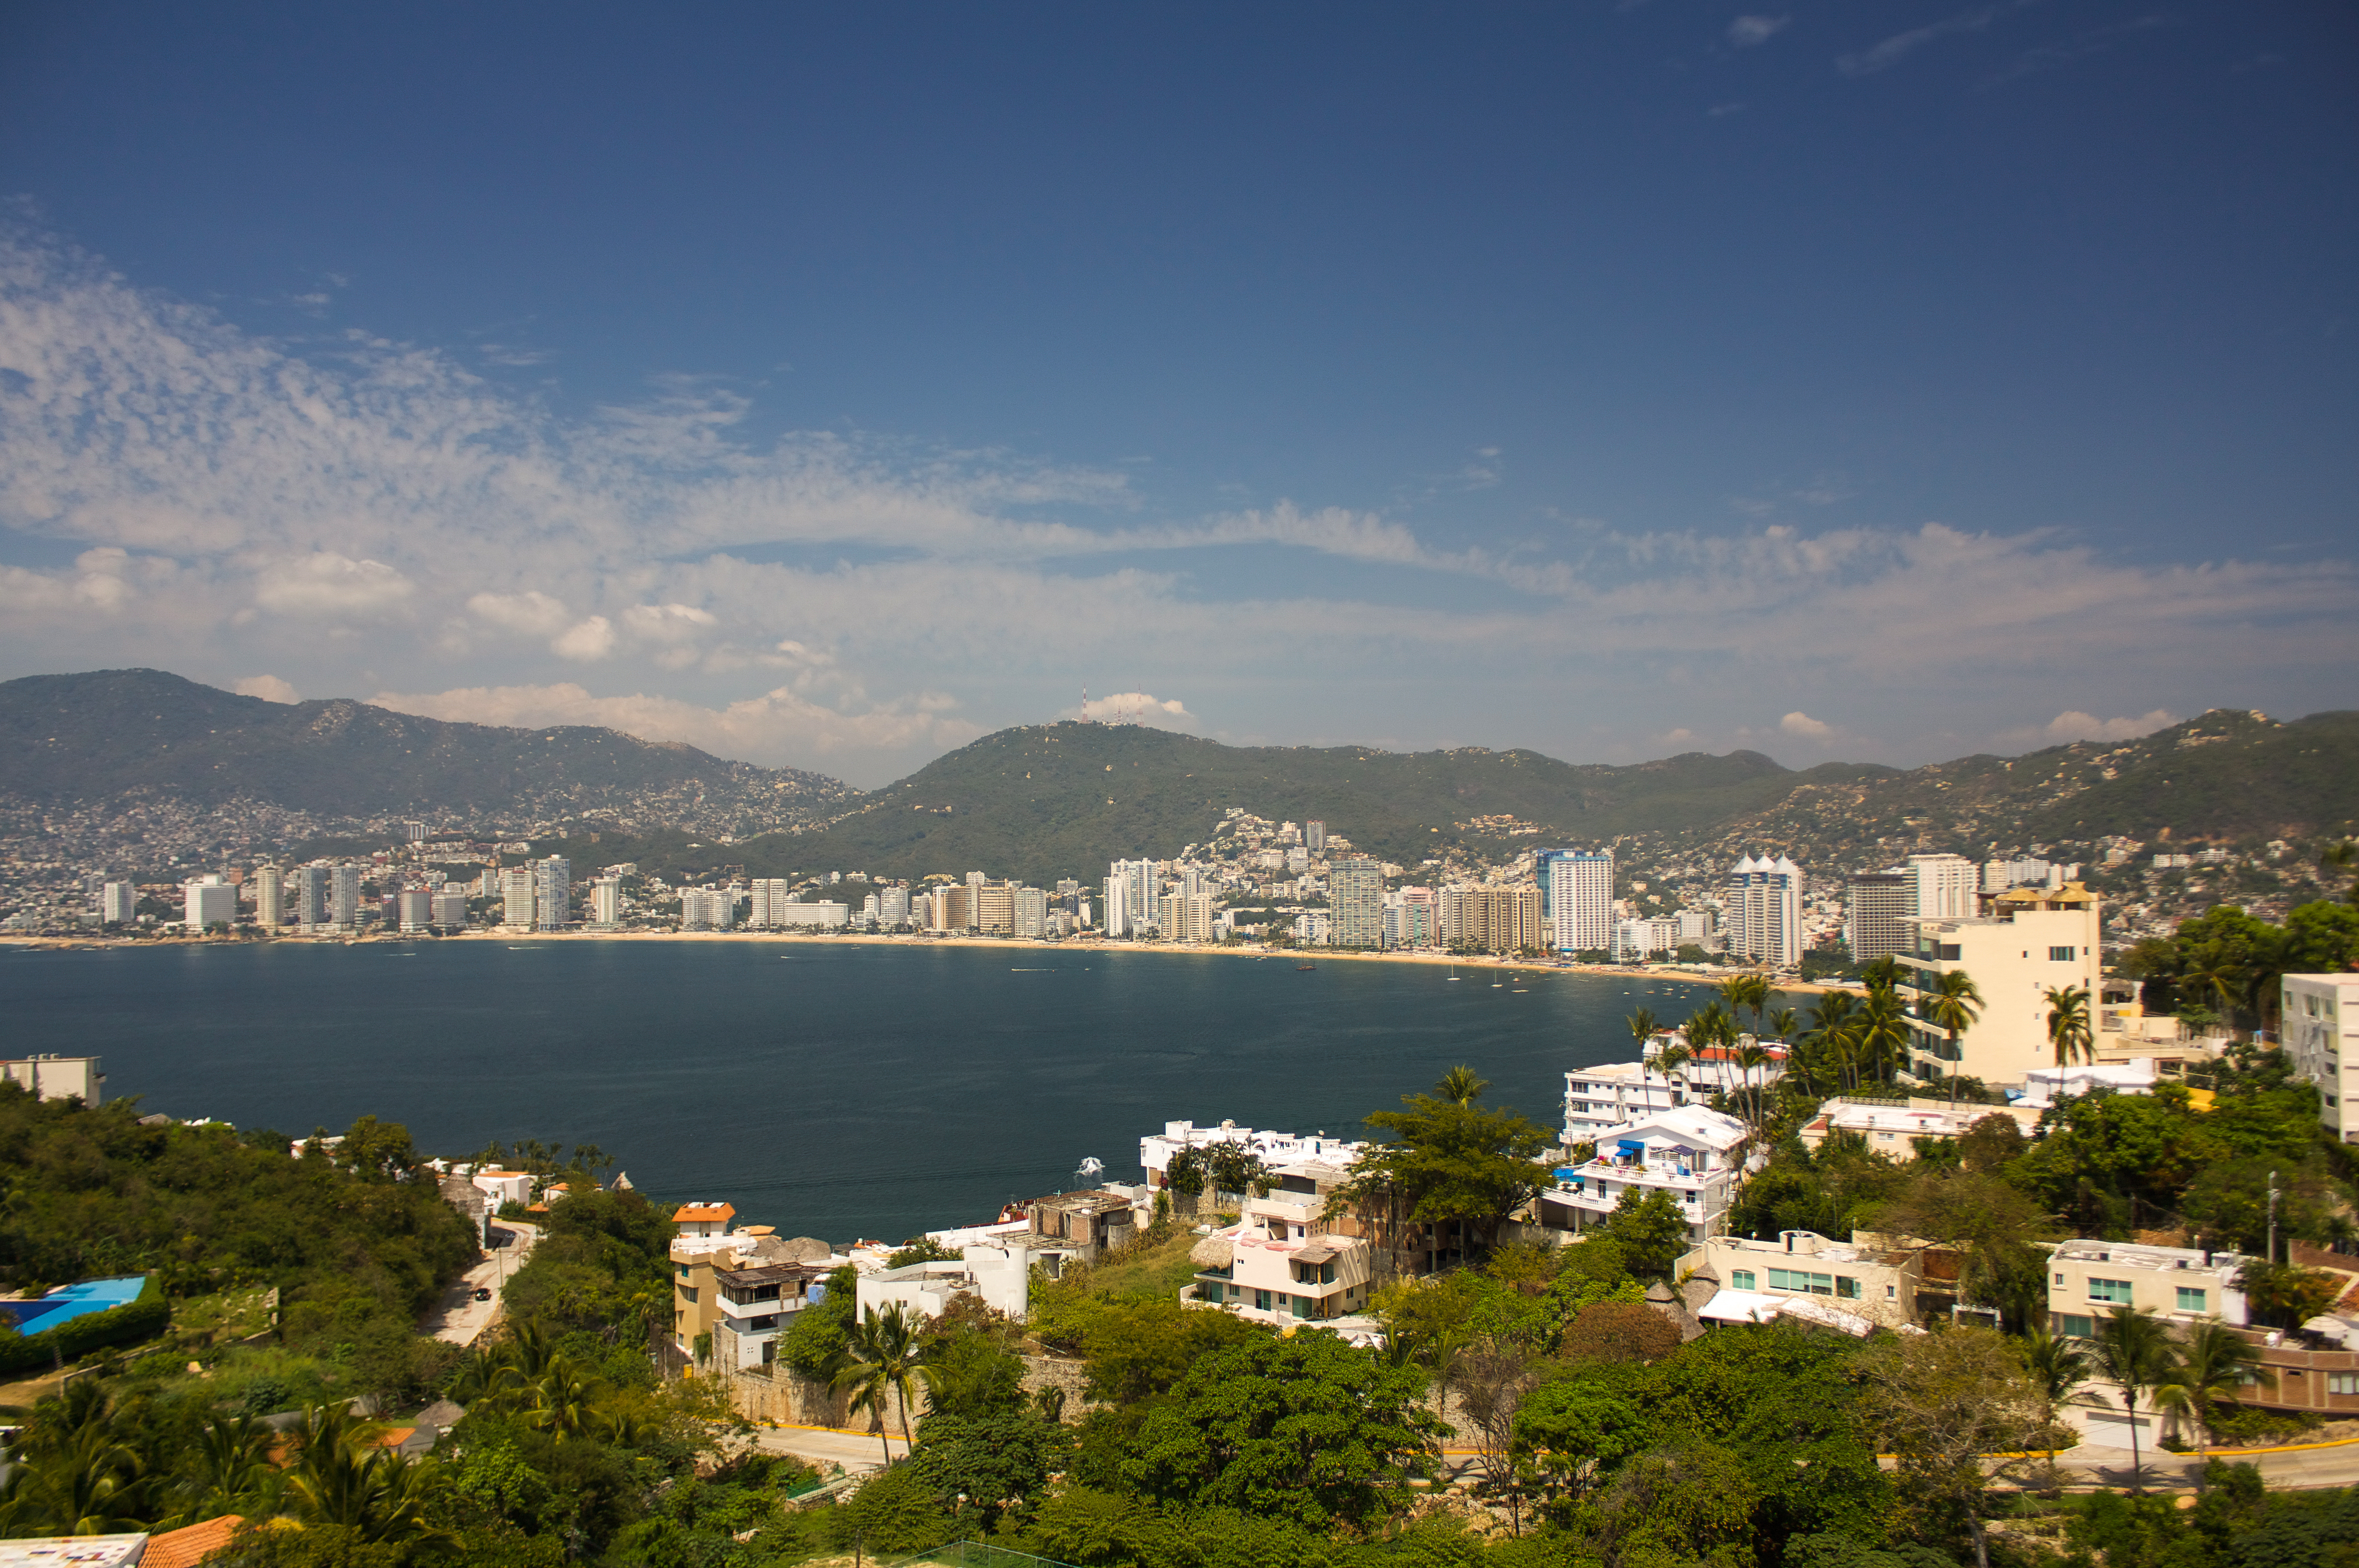 Acapulco Bay Viewed from the south end of the city